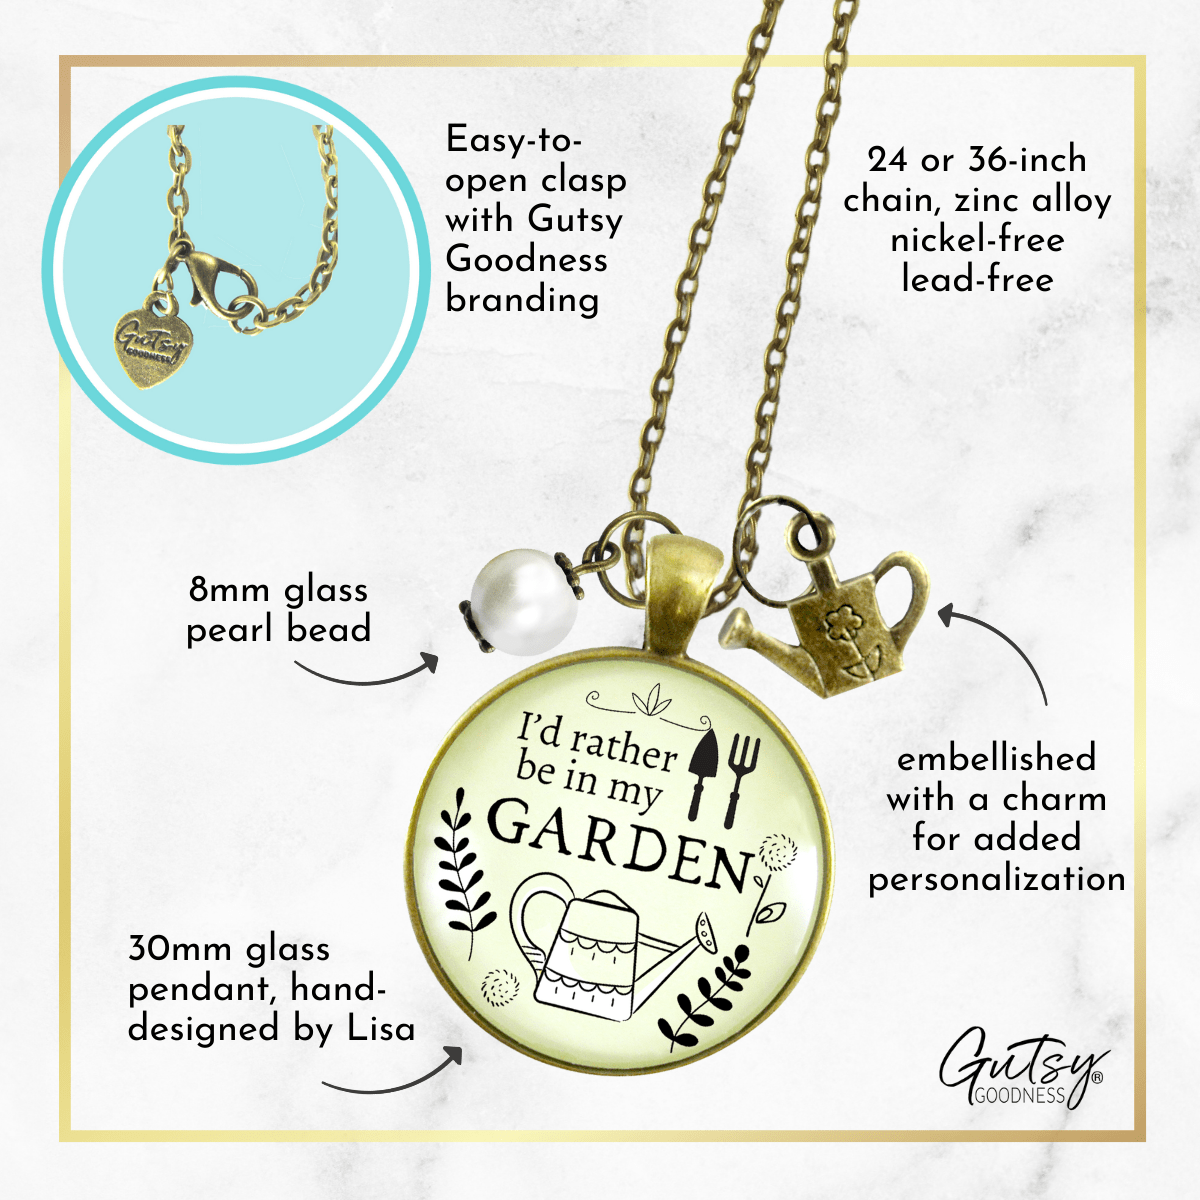 Gutsy Goodness Gardening Necklace I'd Rather Be in My Garden Plant Lady Quote Gift Jewelry - Gutsy Goodness;Gardening Necklace I'd Rather Be In My Garden Plant Lady Quote Gift Jewelry - Gutsy Goodness Handmade Jewelry Gifts